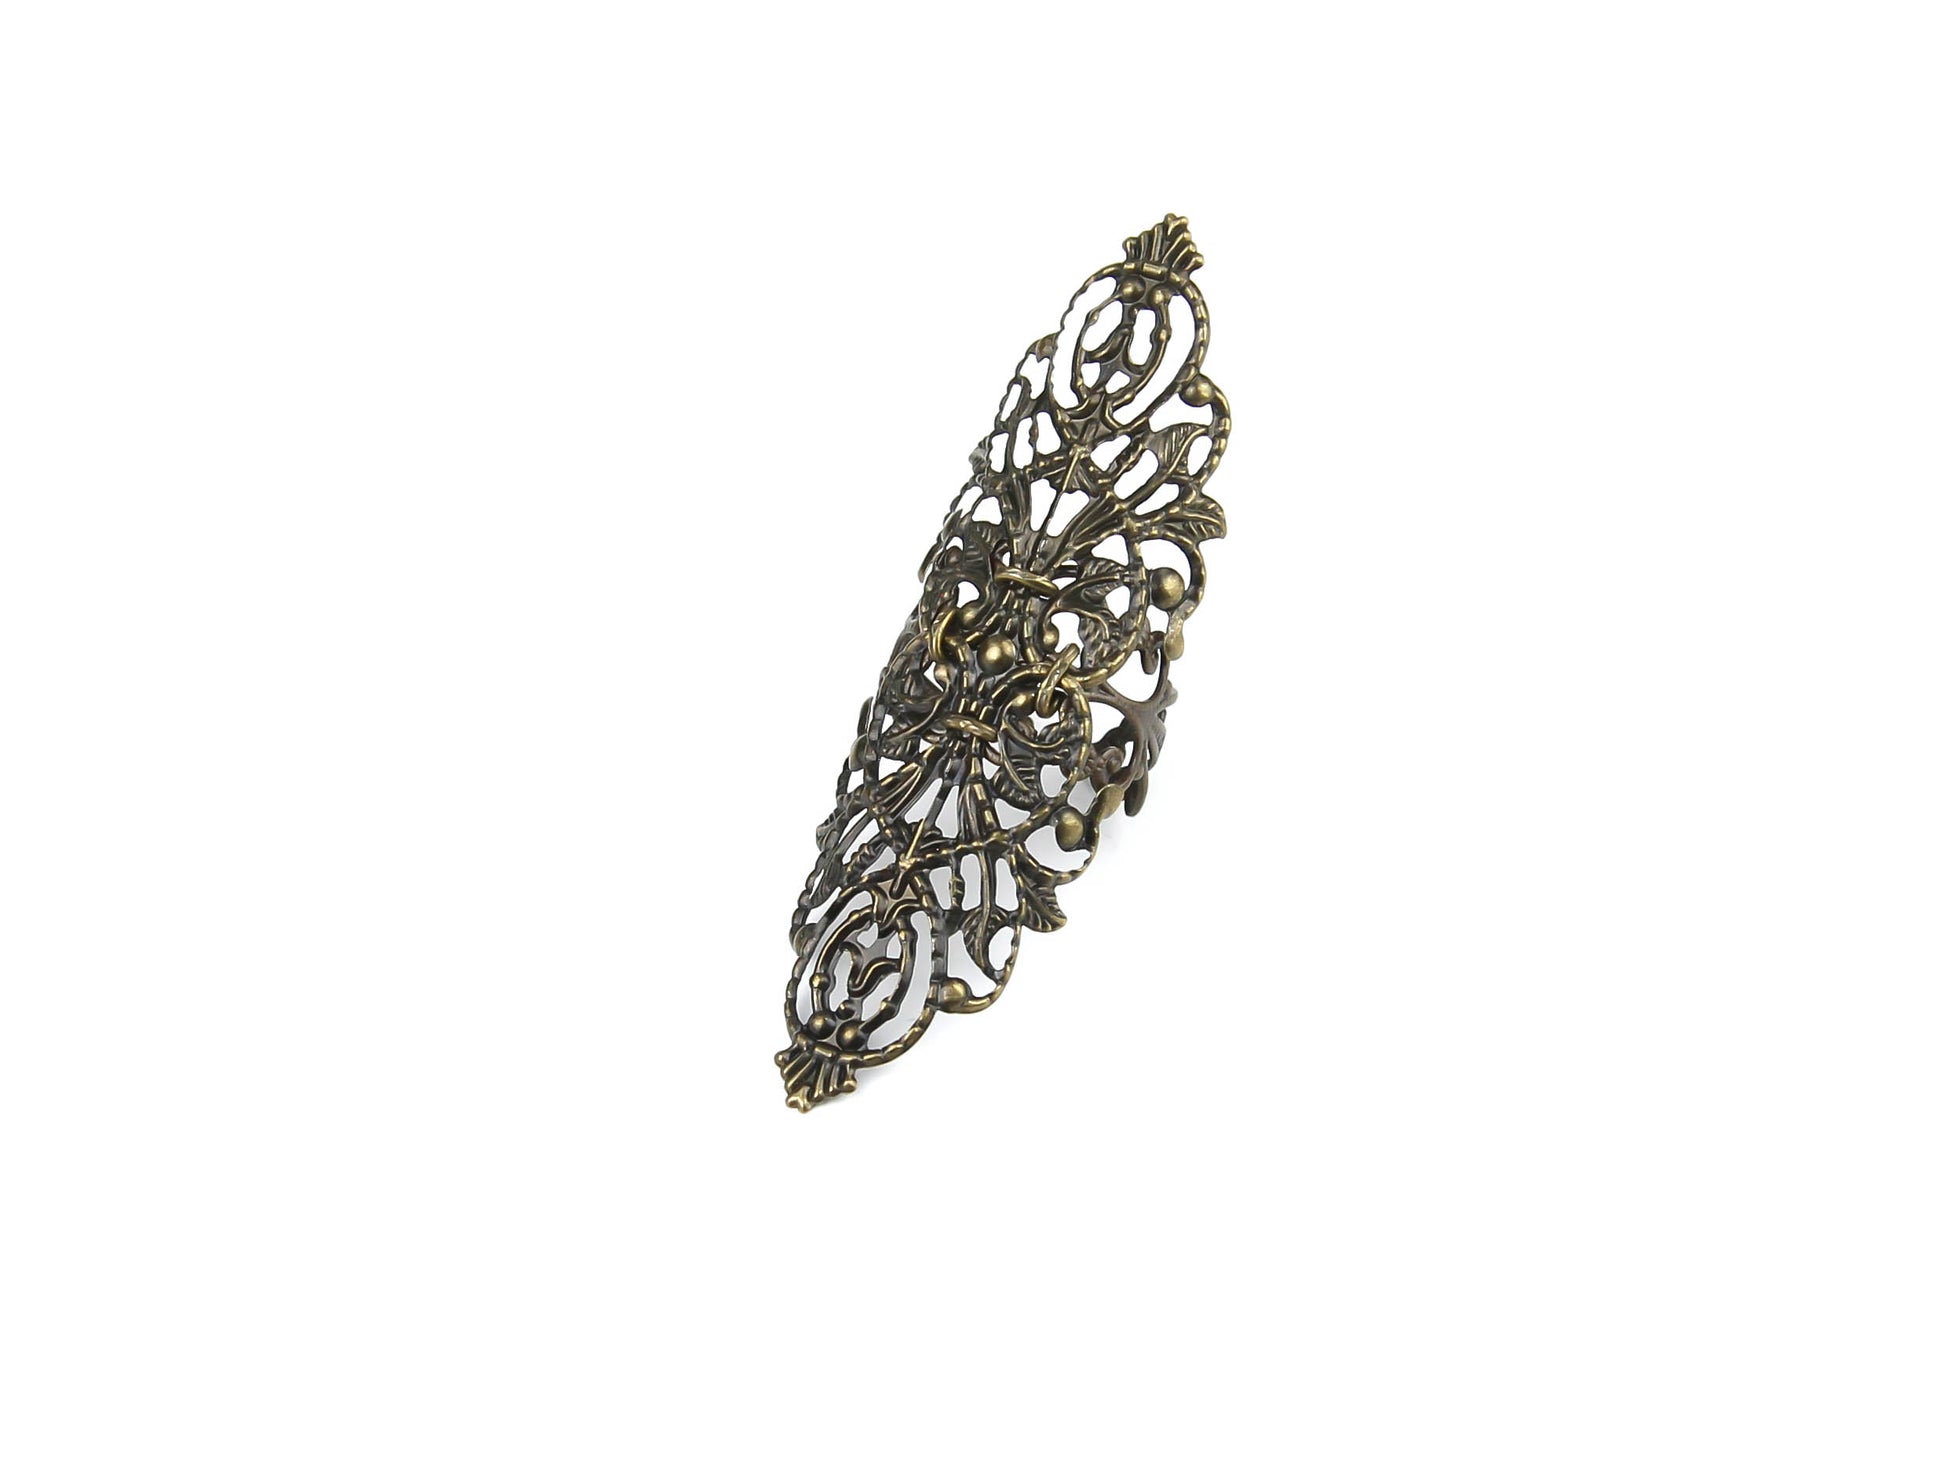  An elegantly crafted wide bronze gothic ring from Myril Jewels, this piece is a stunning accessory for those with a love for neo-gothic and alternative styles. It's an ideal complement to a Halloween ensemble or punk attire, perfect for daily wear in a minimal goth wardrobe, and a standout choice for festivals or rave parties. This ring serves as a thoughtful, bold gift for the witchcore-adoring goth girlfriend or friend.